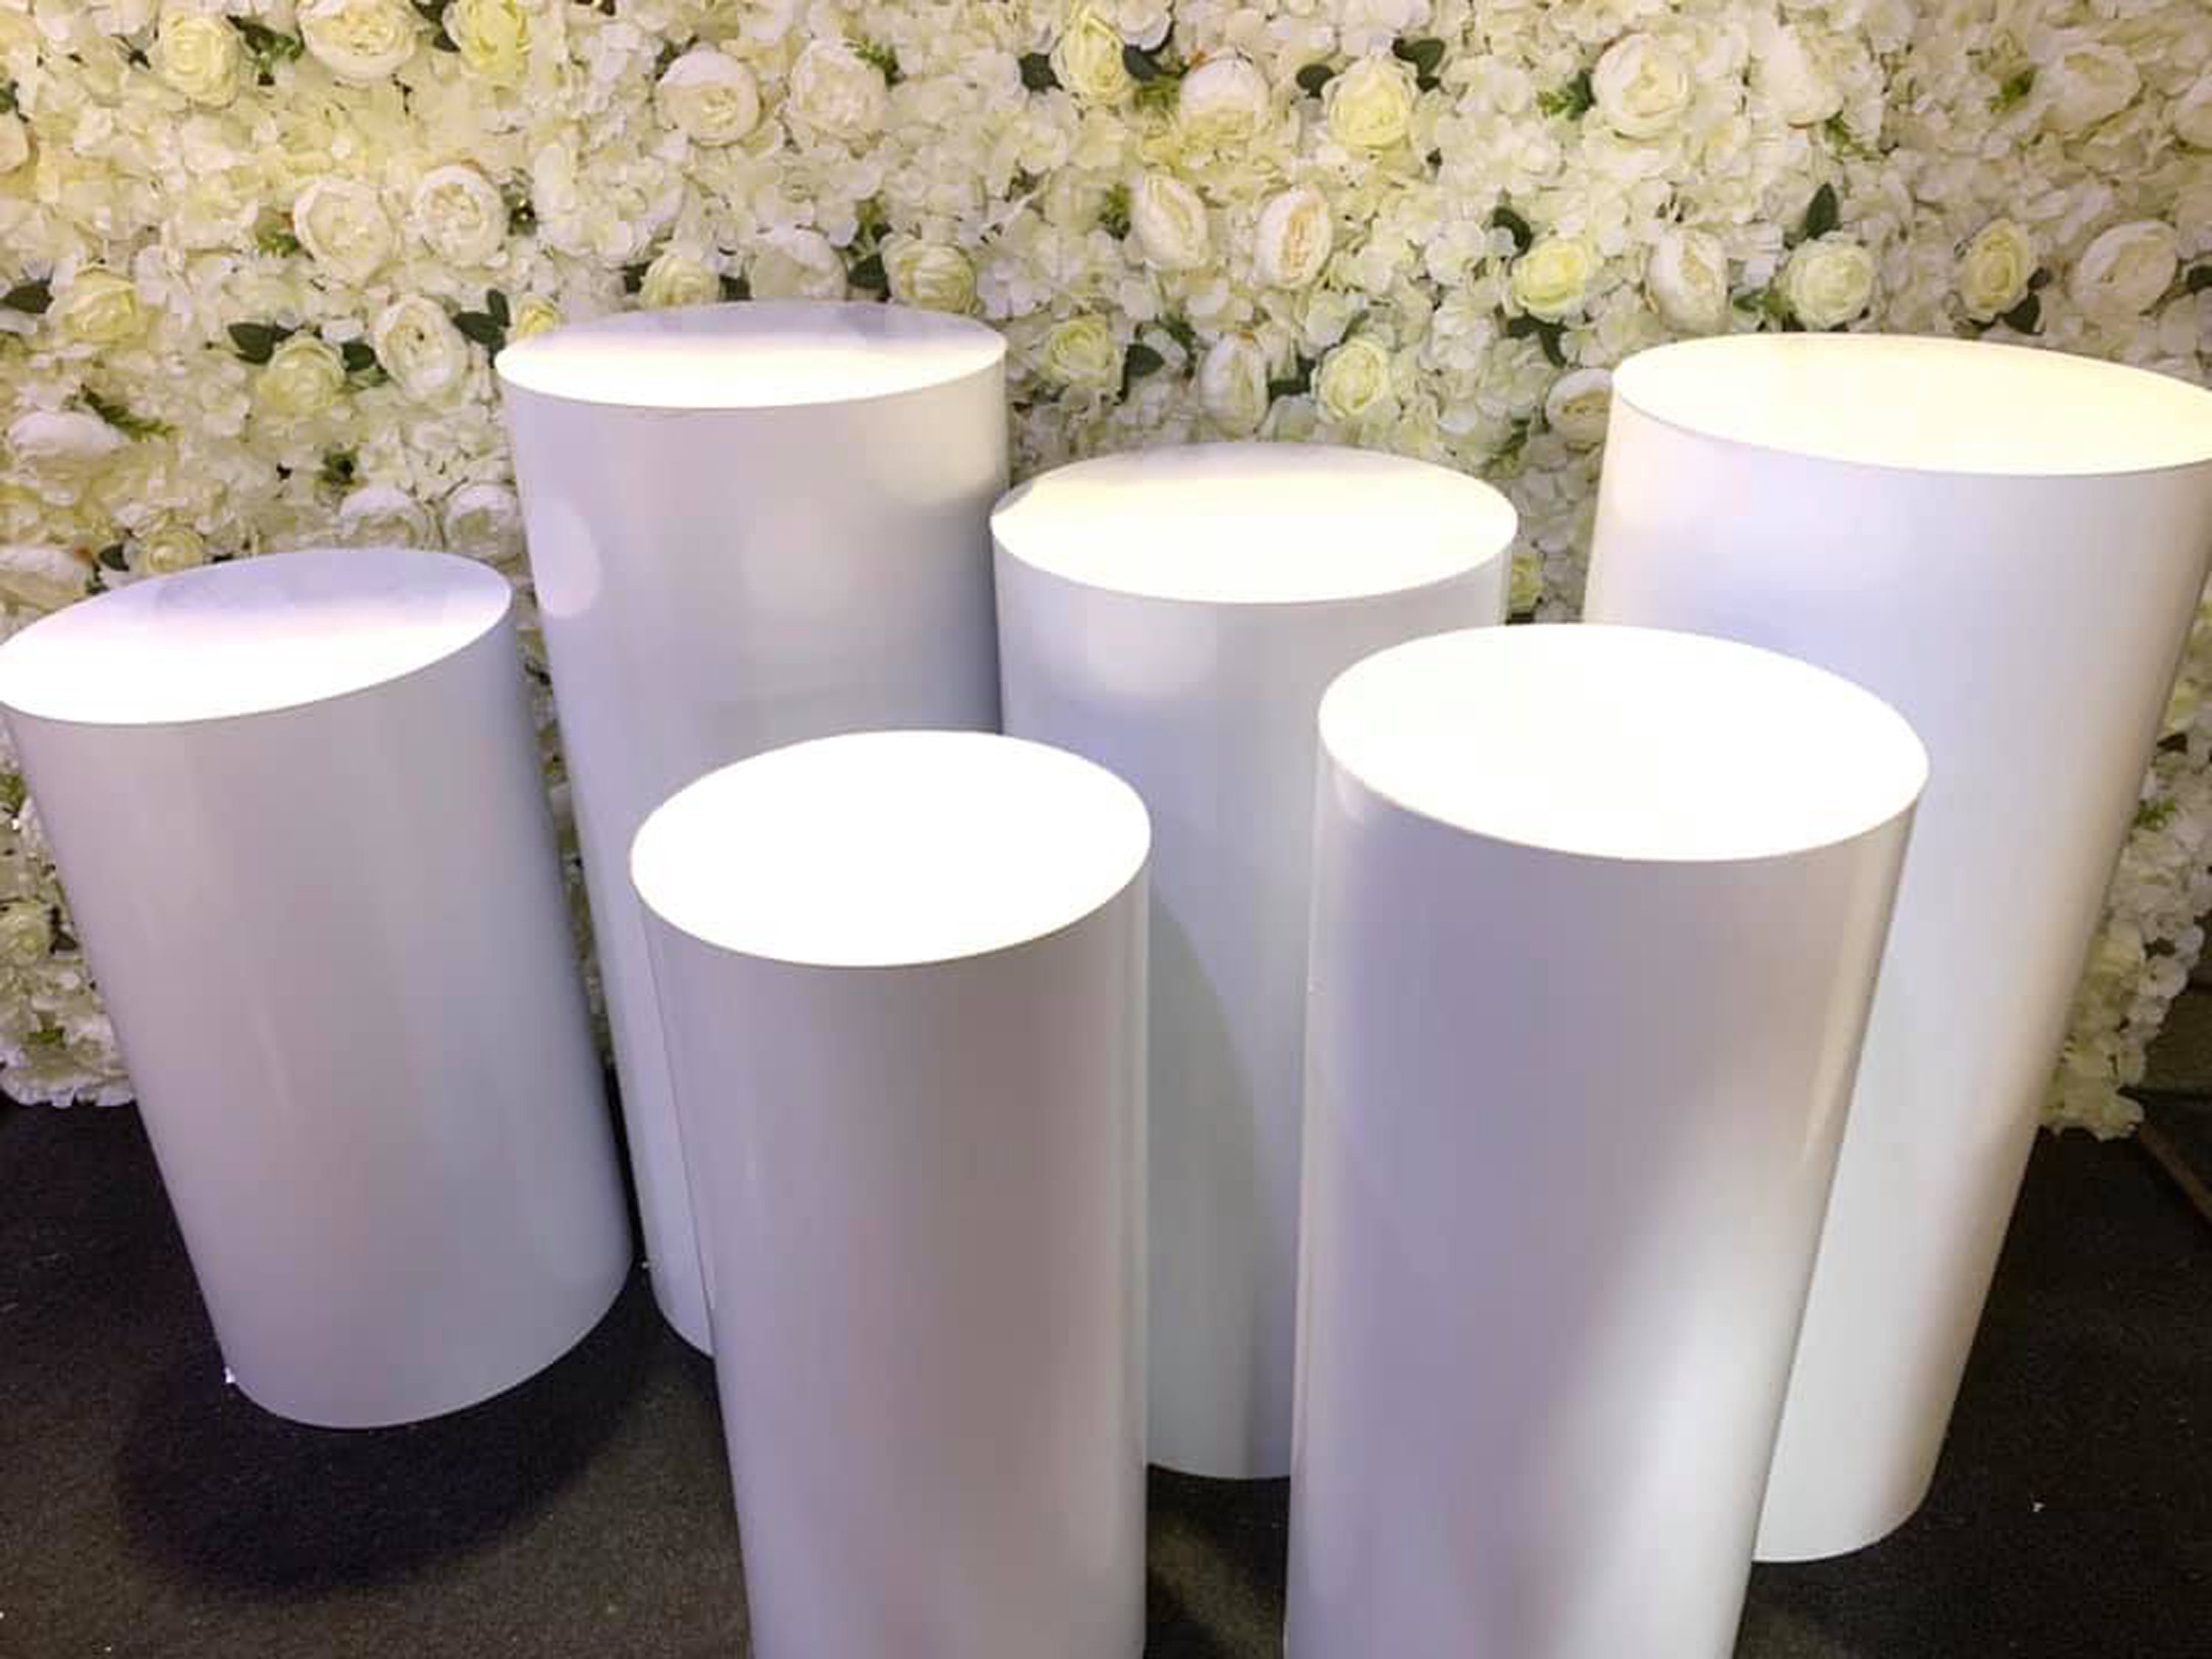 Display Plinths/Podiums round White Weddings Baby shower Special occasions event 